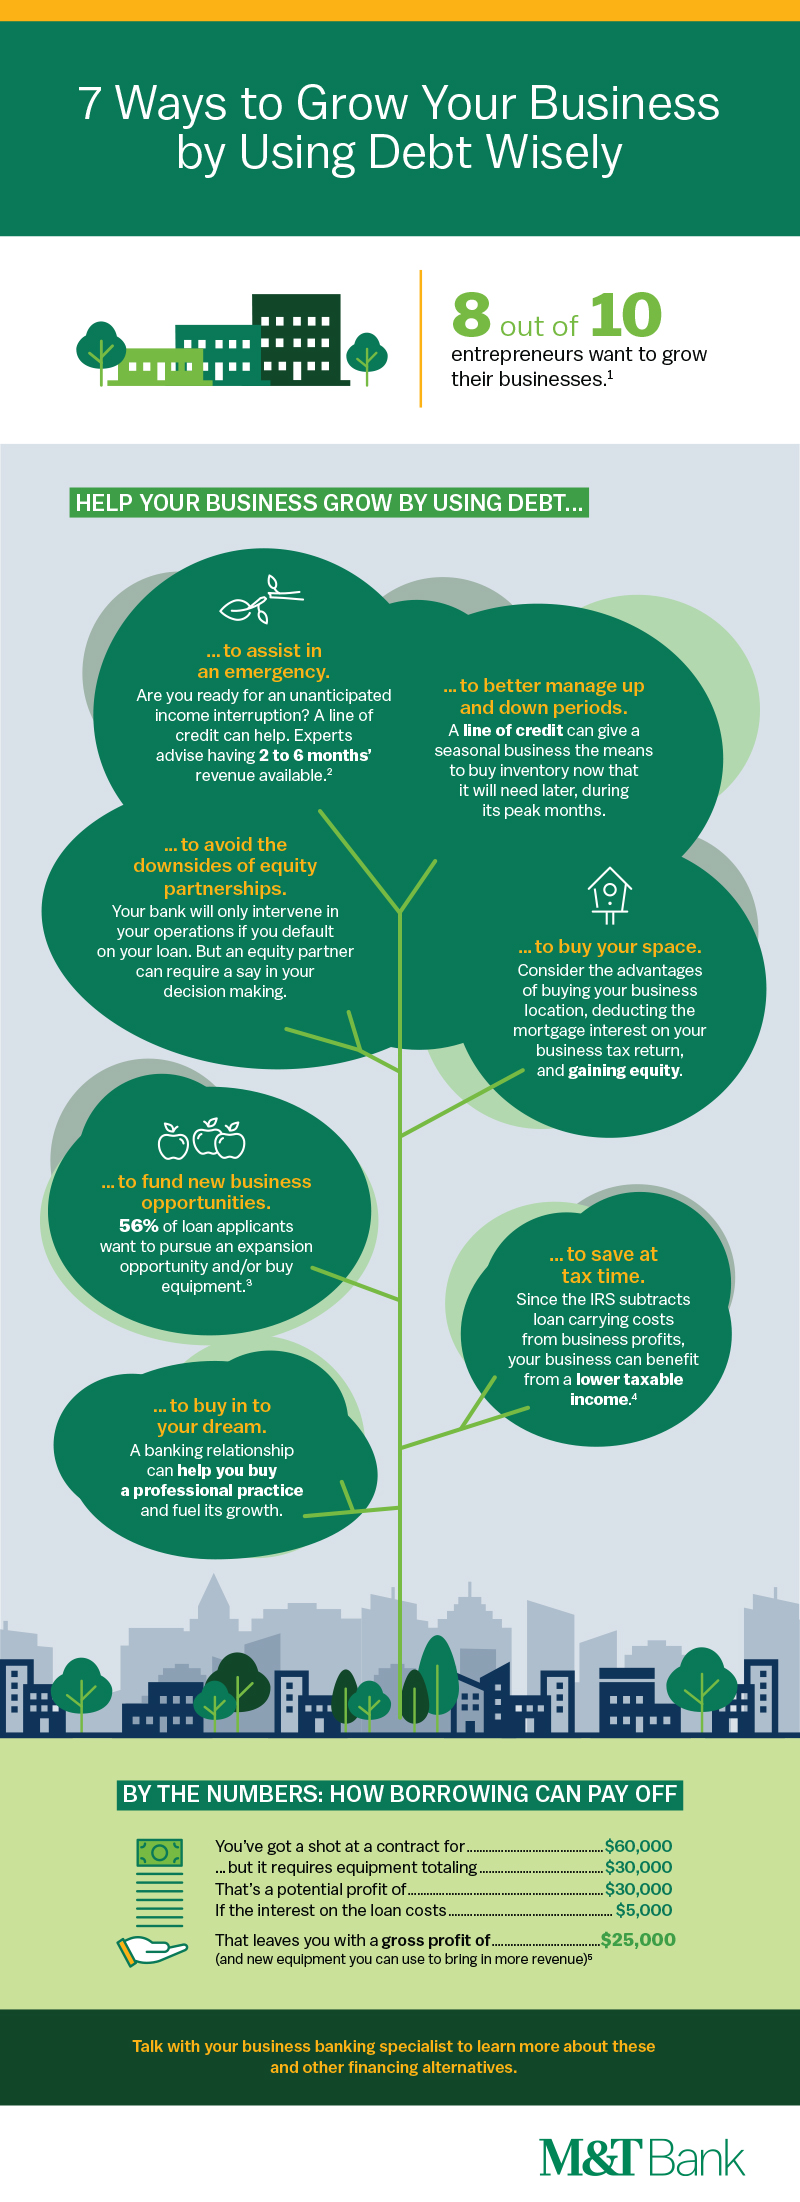 seven-ways-to-grow-your-business-using-debt-wisely-infographic-800w.jpg